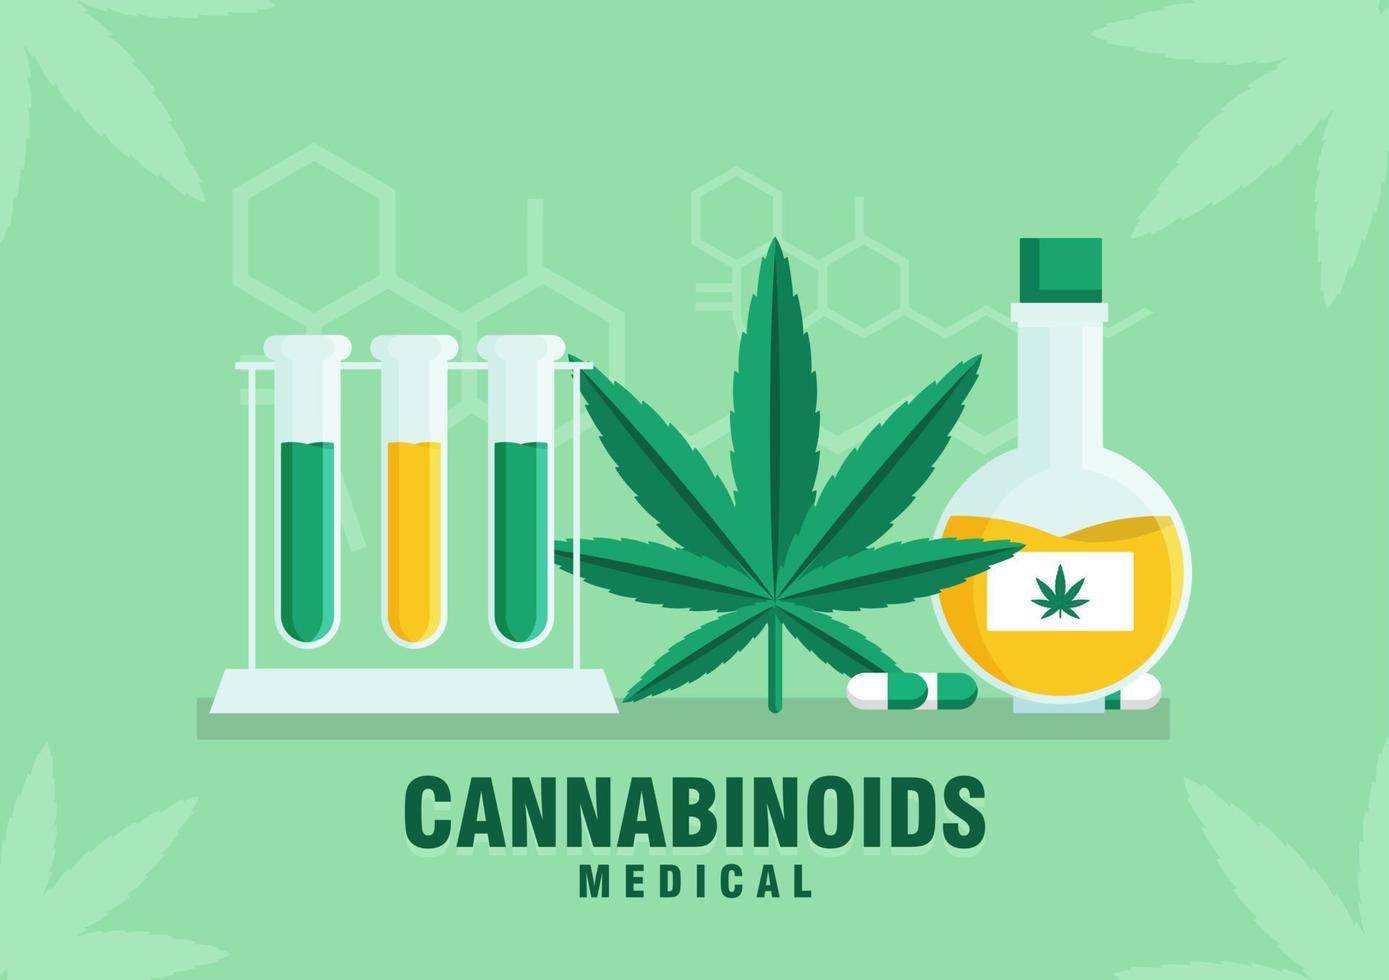 Cannabinoids illustration. Medical of cannabis flat illustration. Flat design style. Modern color of healthcare. Vector eps 10